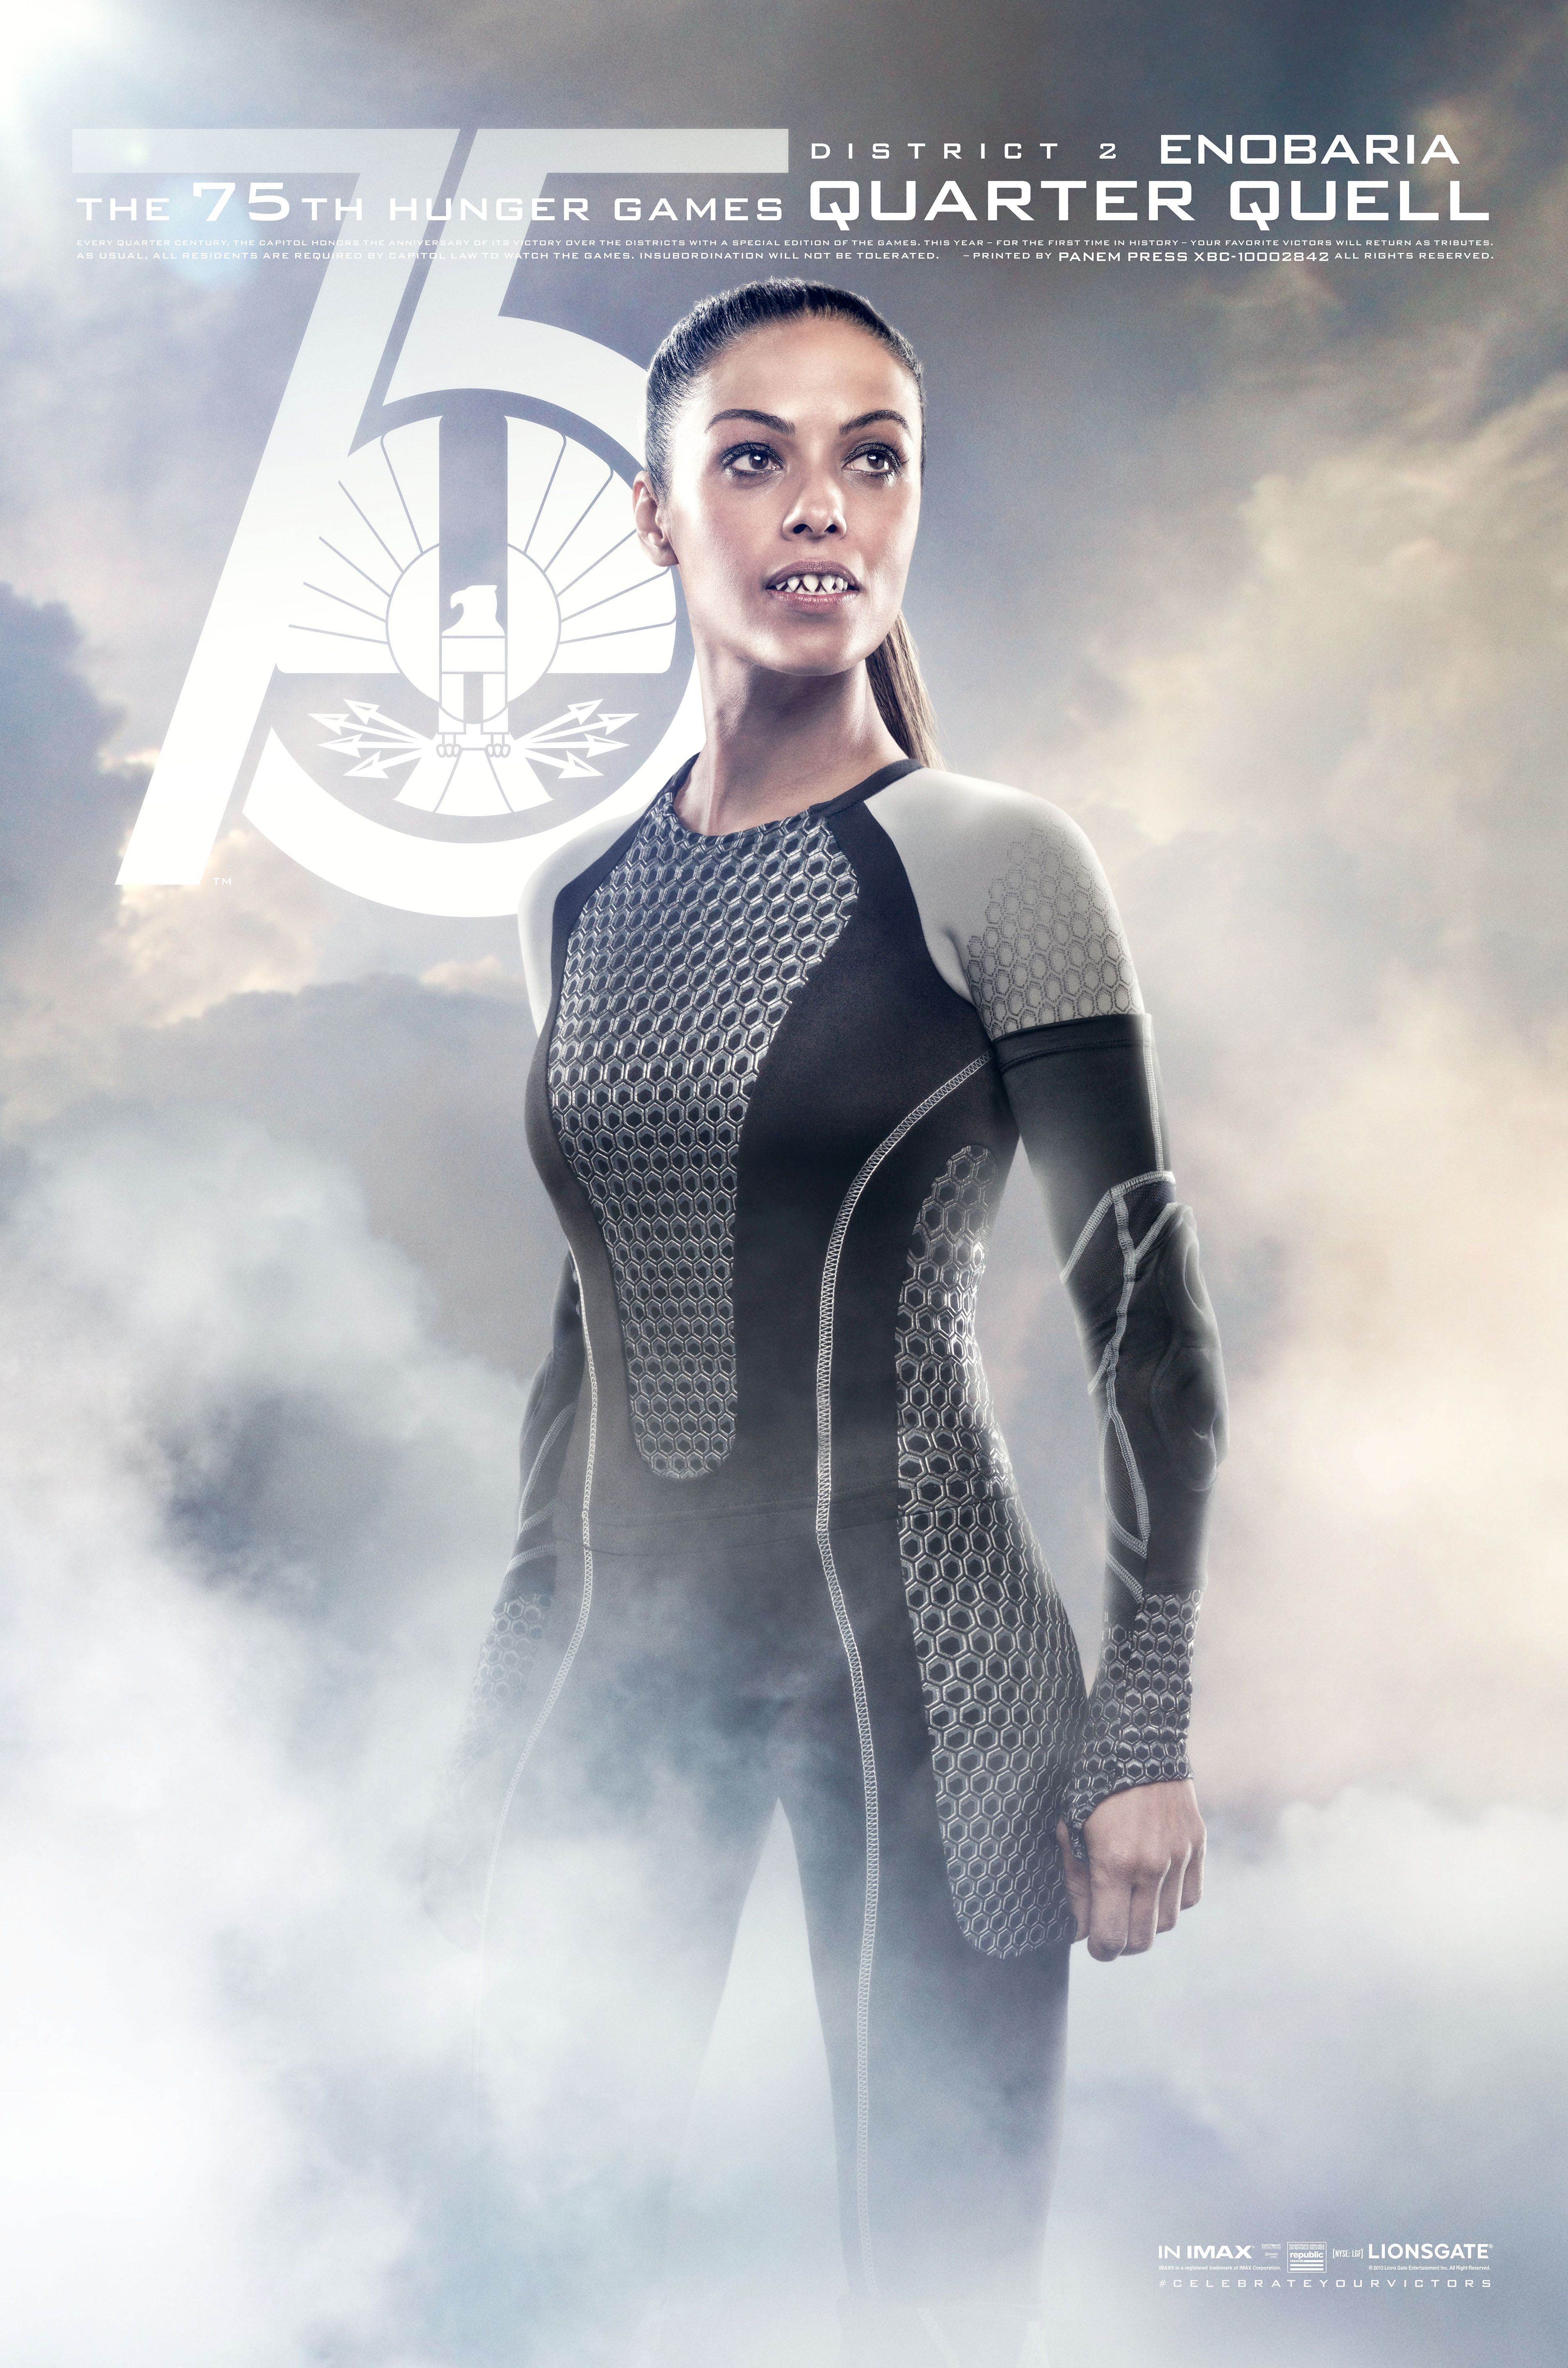 The Hunger Games Catching Fire Enobaria Poster